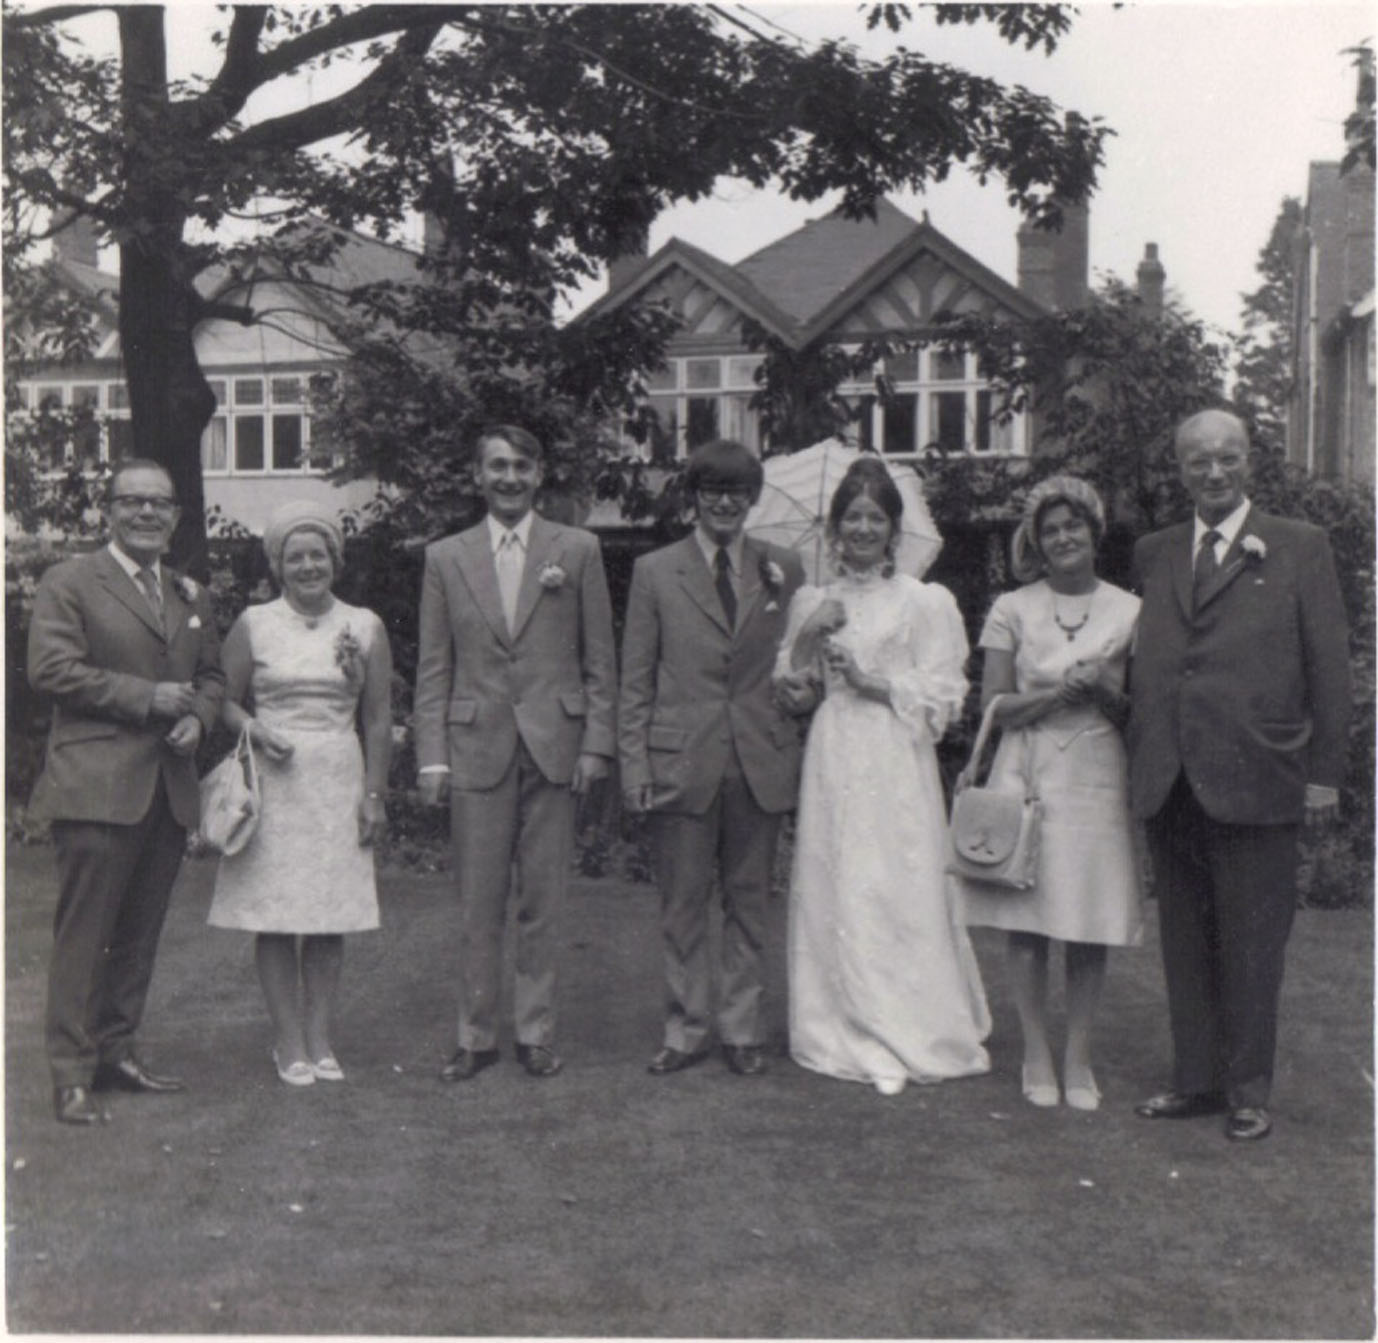 L-R: Roger and Daisy Rothwell, Neil Perry, Tim and Libby (Elizabeth A M née Frank) Rothwell, Mary and Vilda Frank